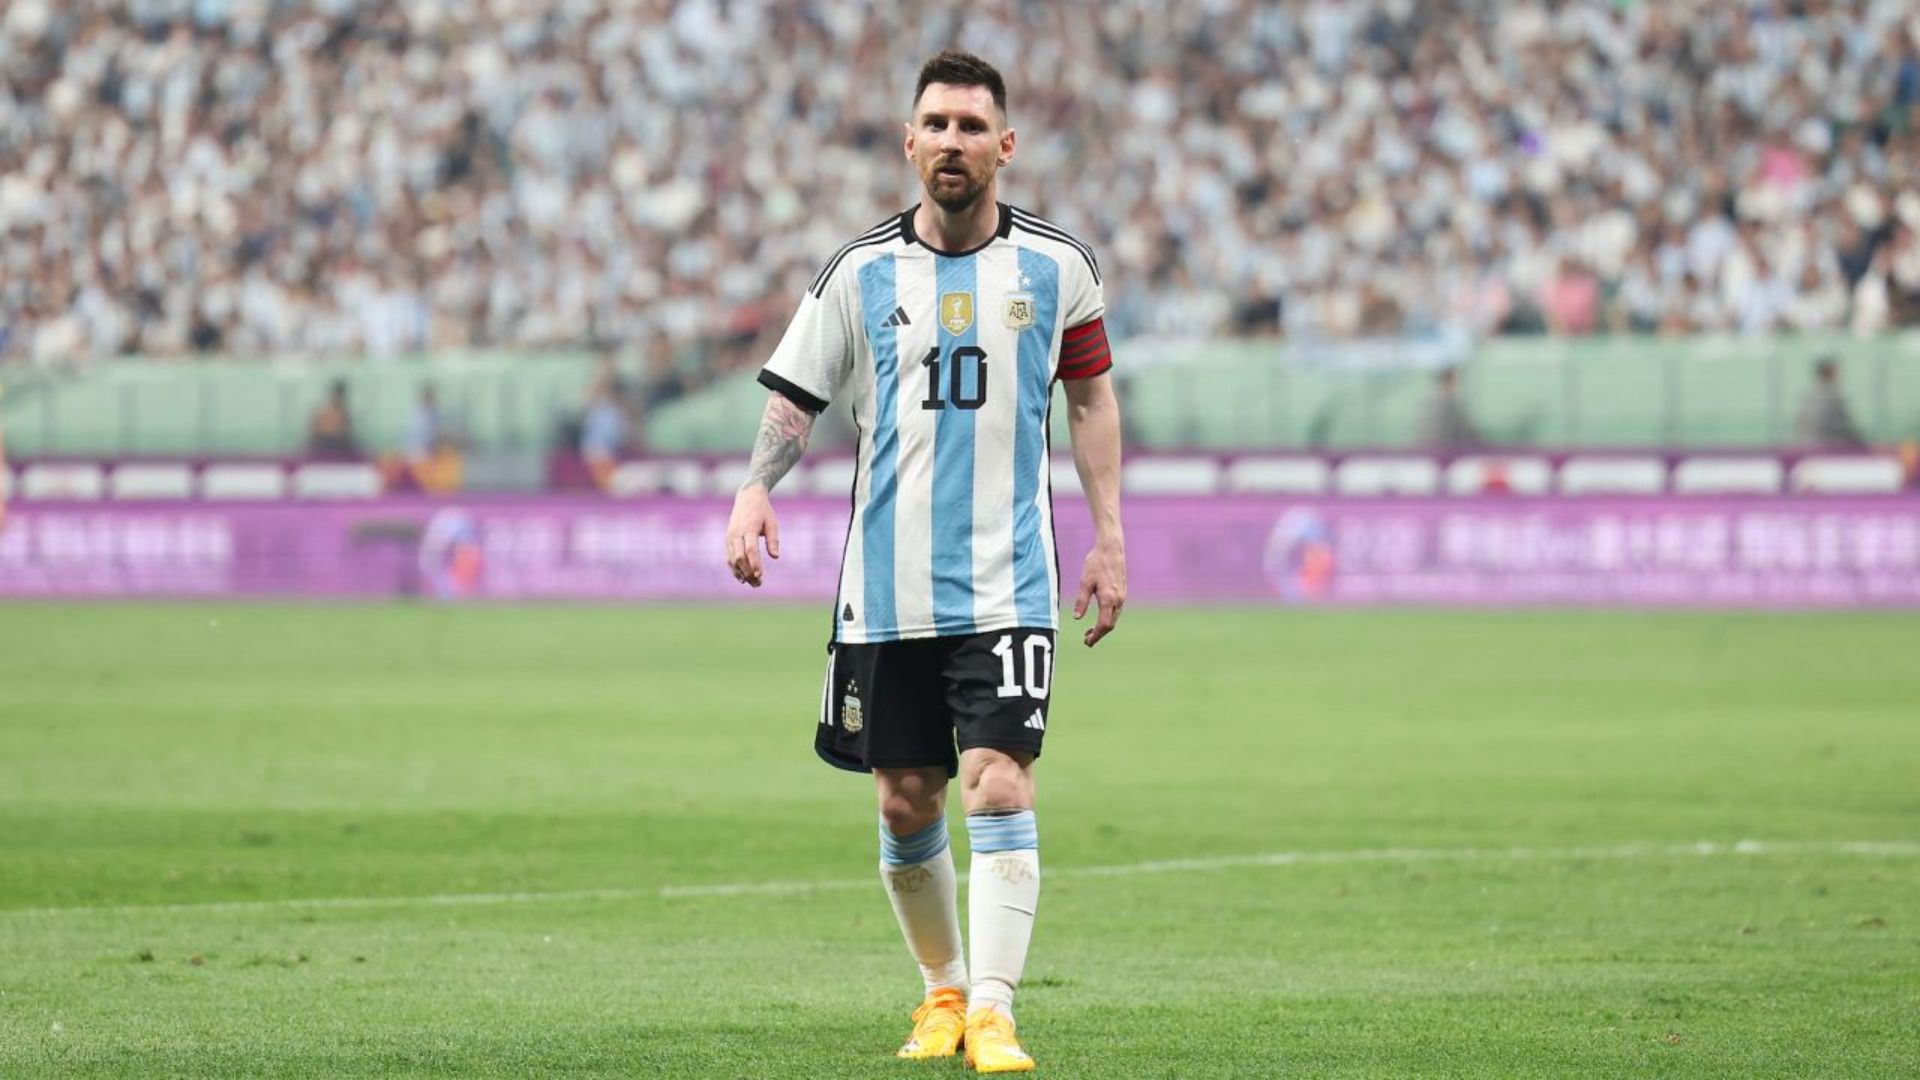 Lionel Messi Standing On A Football Field